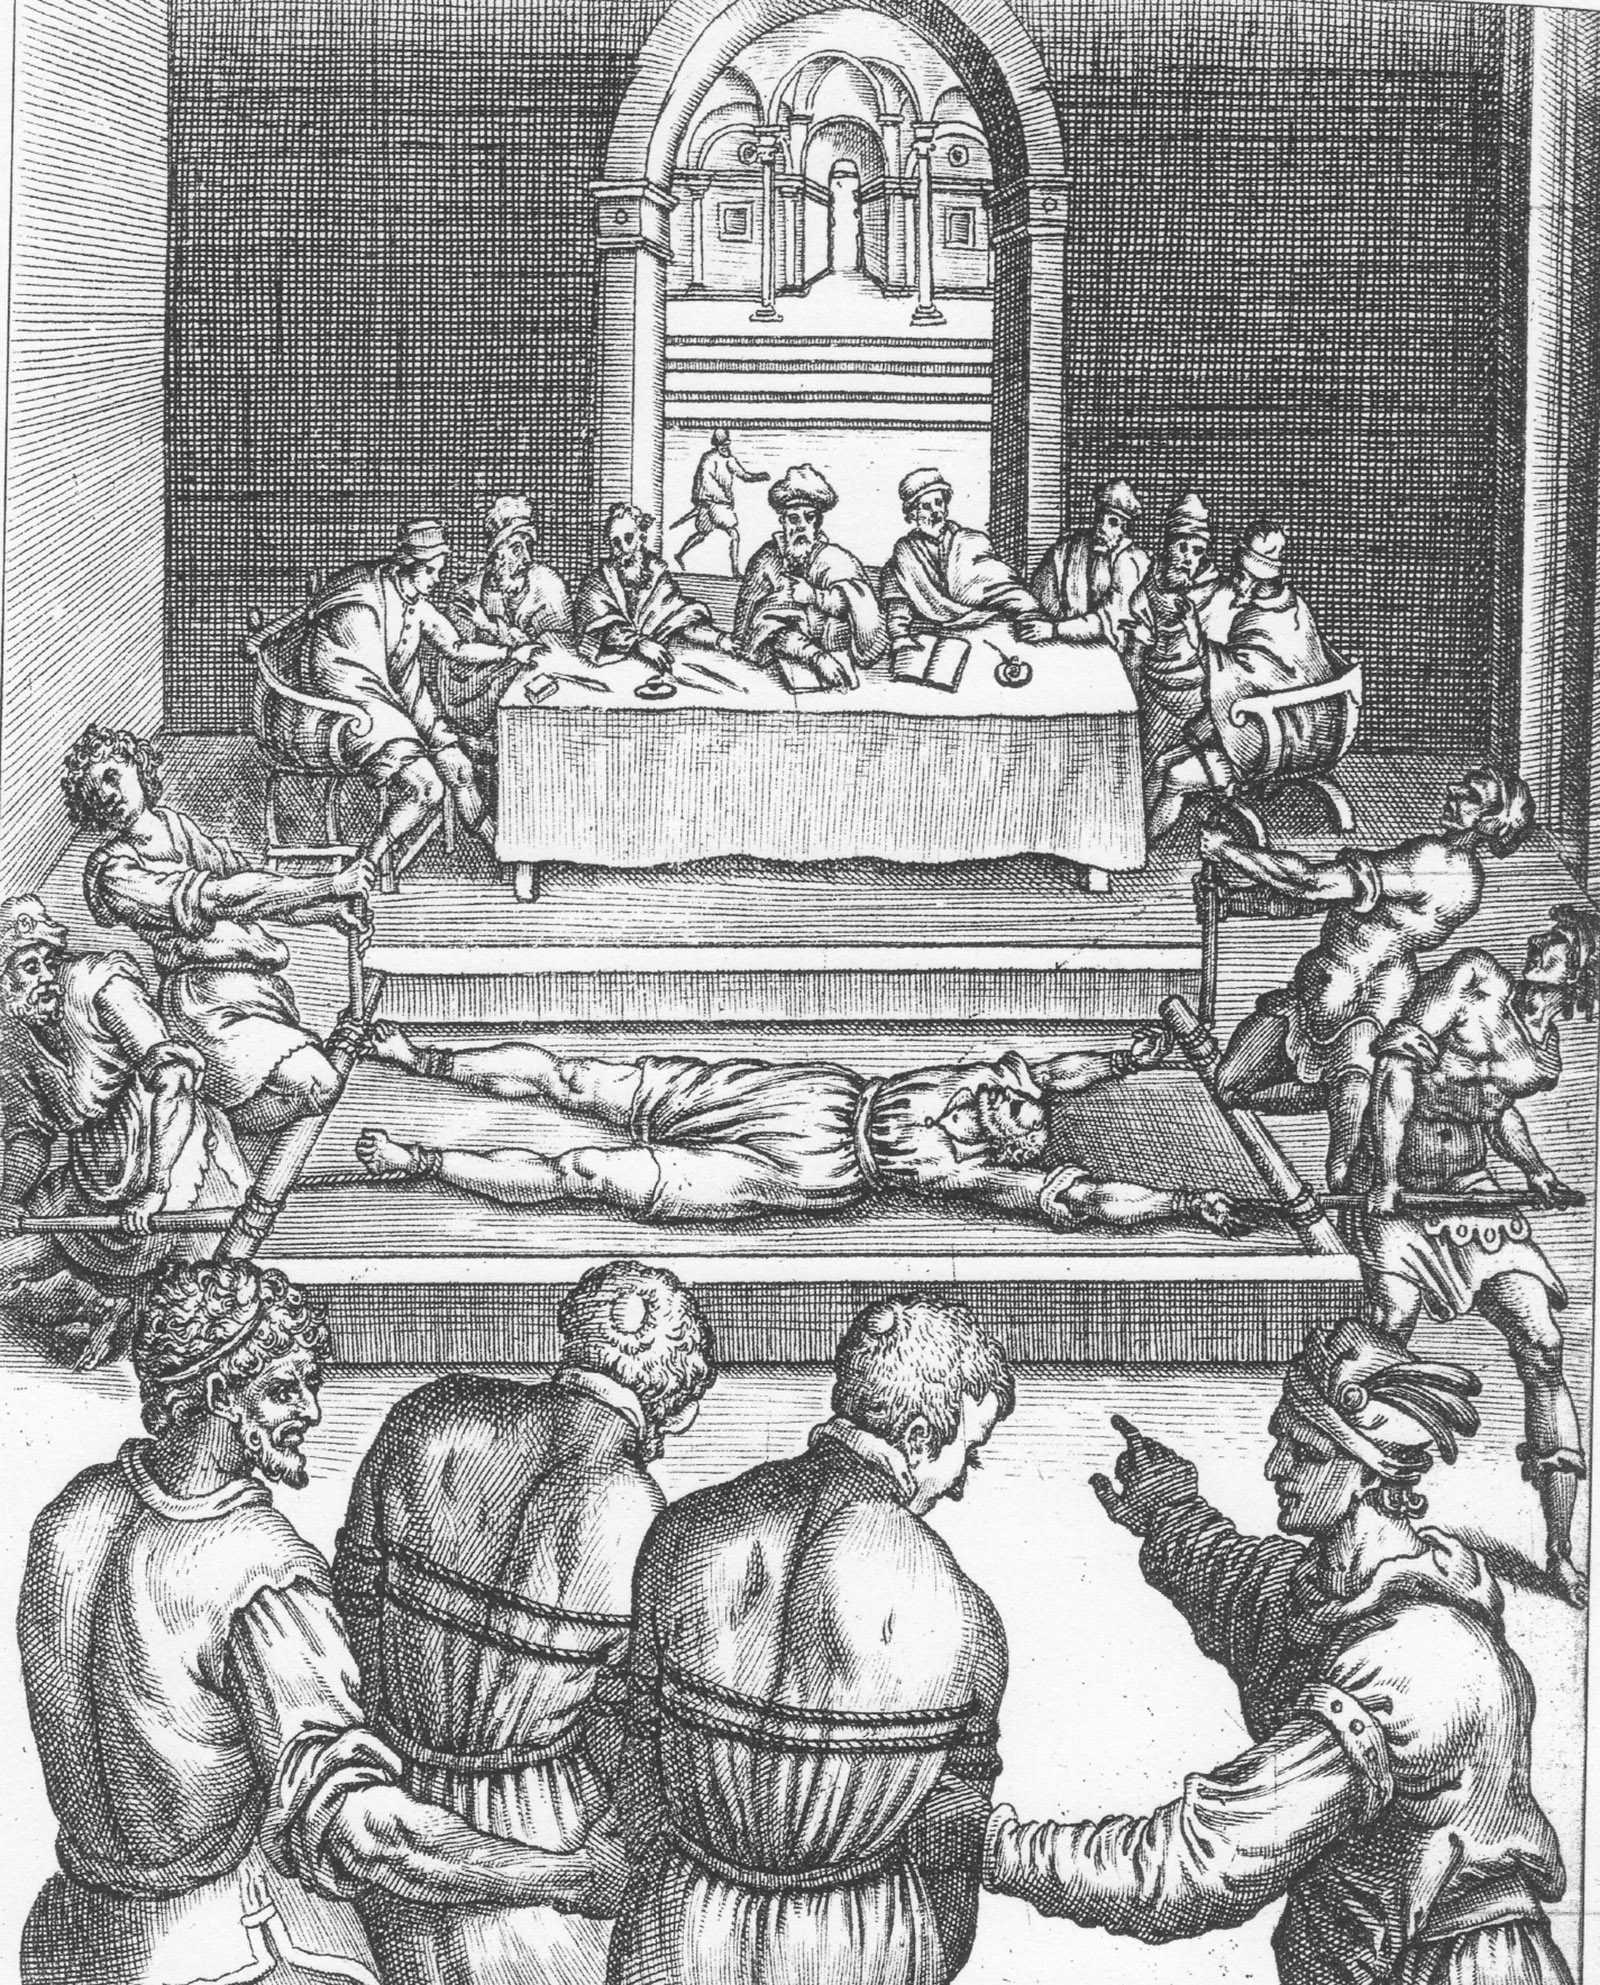 ‘Edmund Campion on the Rack’; engraving by Niccolò Circignani from Ecclesiae Anglicanae Trophaea, 1584